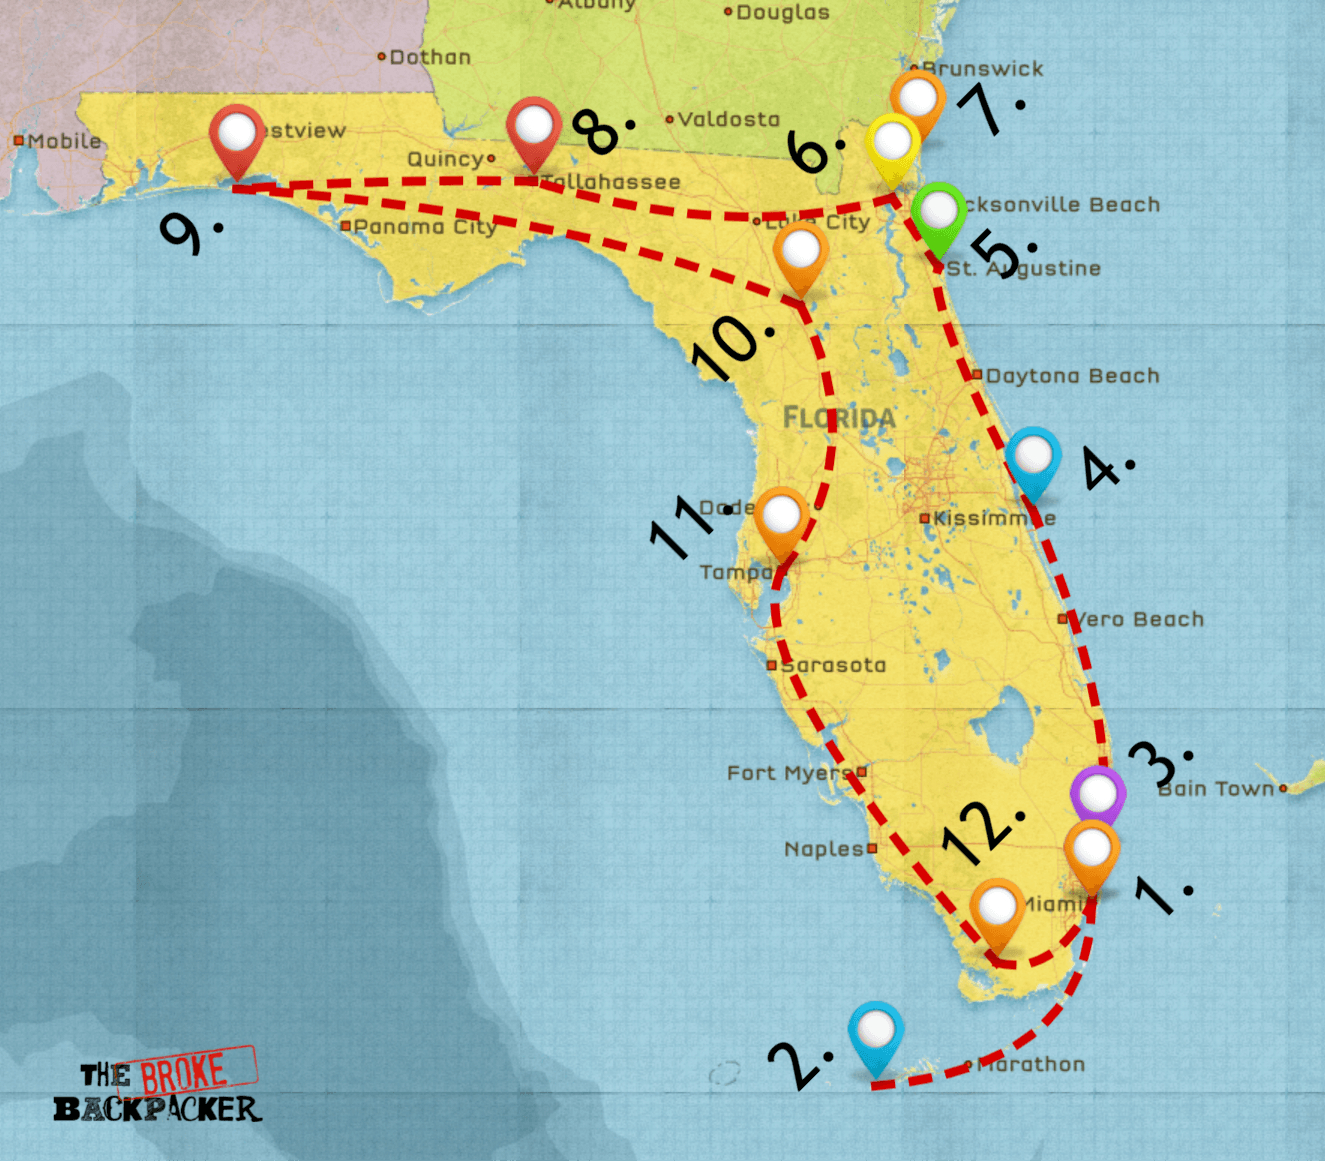 Epic Florida Road Trip Guide For March 2019 - Itineraries, Tips - Wisconsin To Florida Road Trip Map